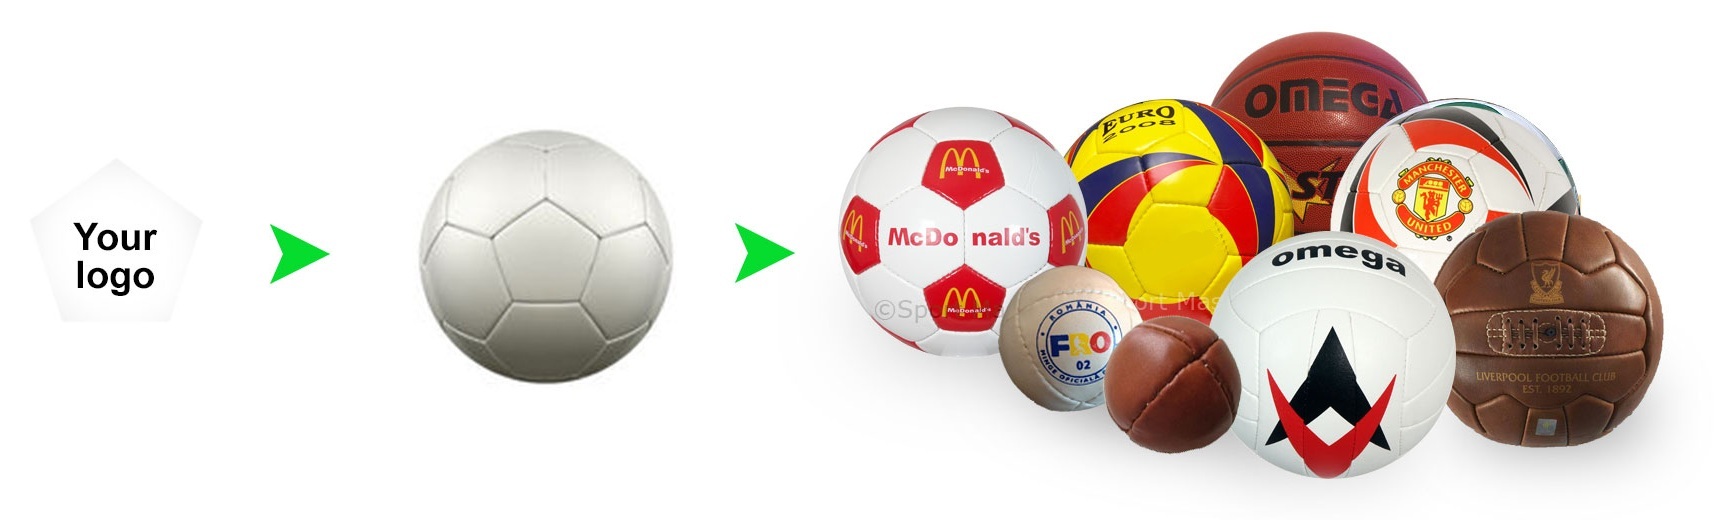 Production process of custom balls with your logo